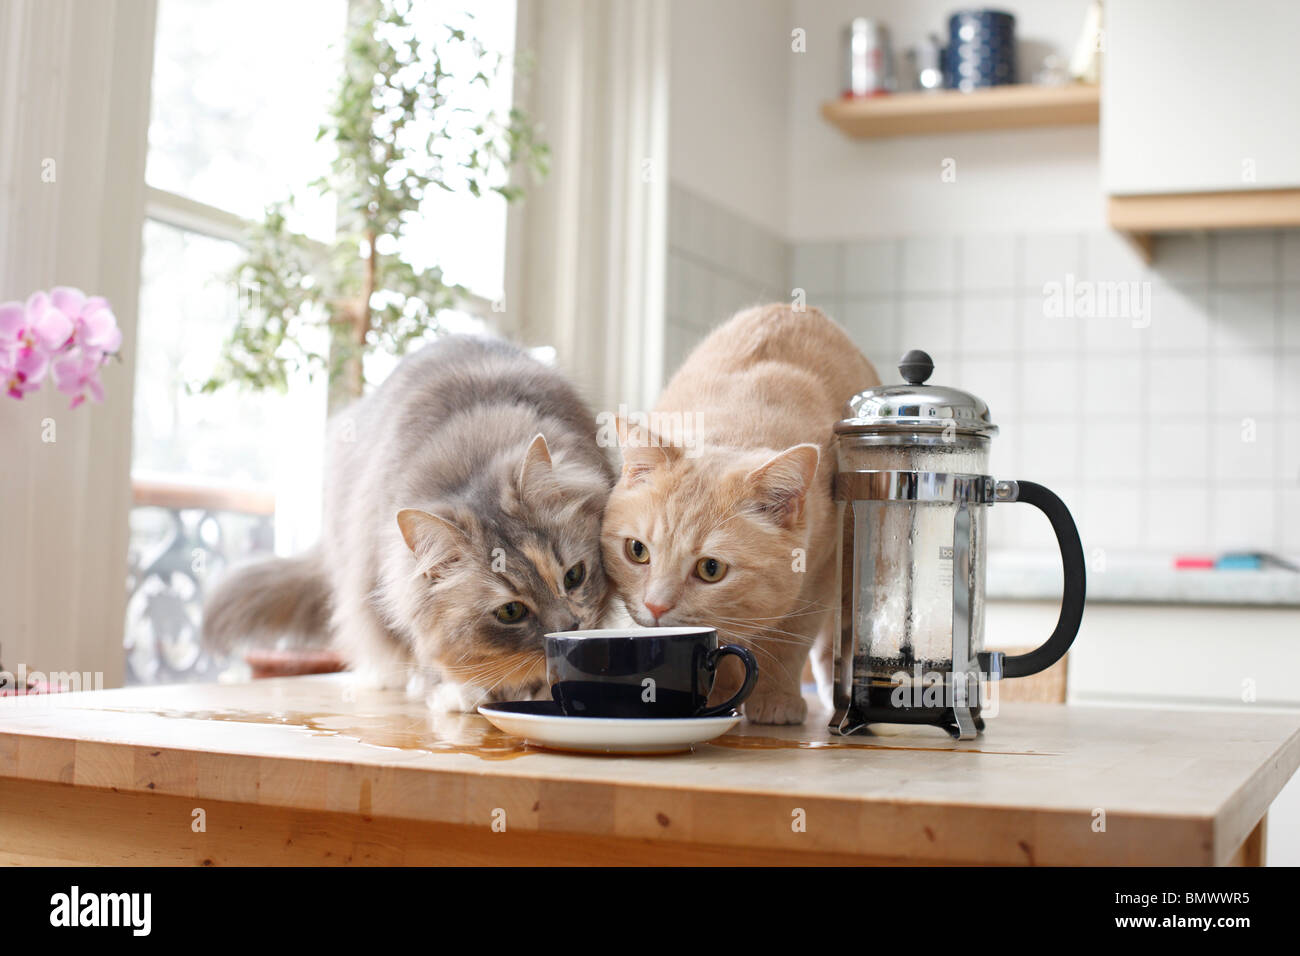 British Shorthair (Felis silvestris f. catus), two 2 years old cats sitting on a kitchen table watching a cup of coffee, Germany Stock Photo